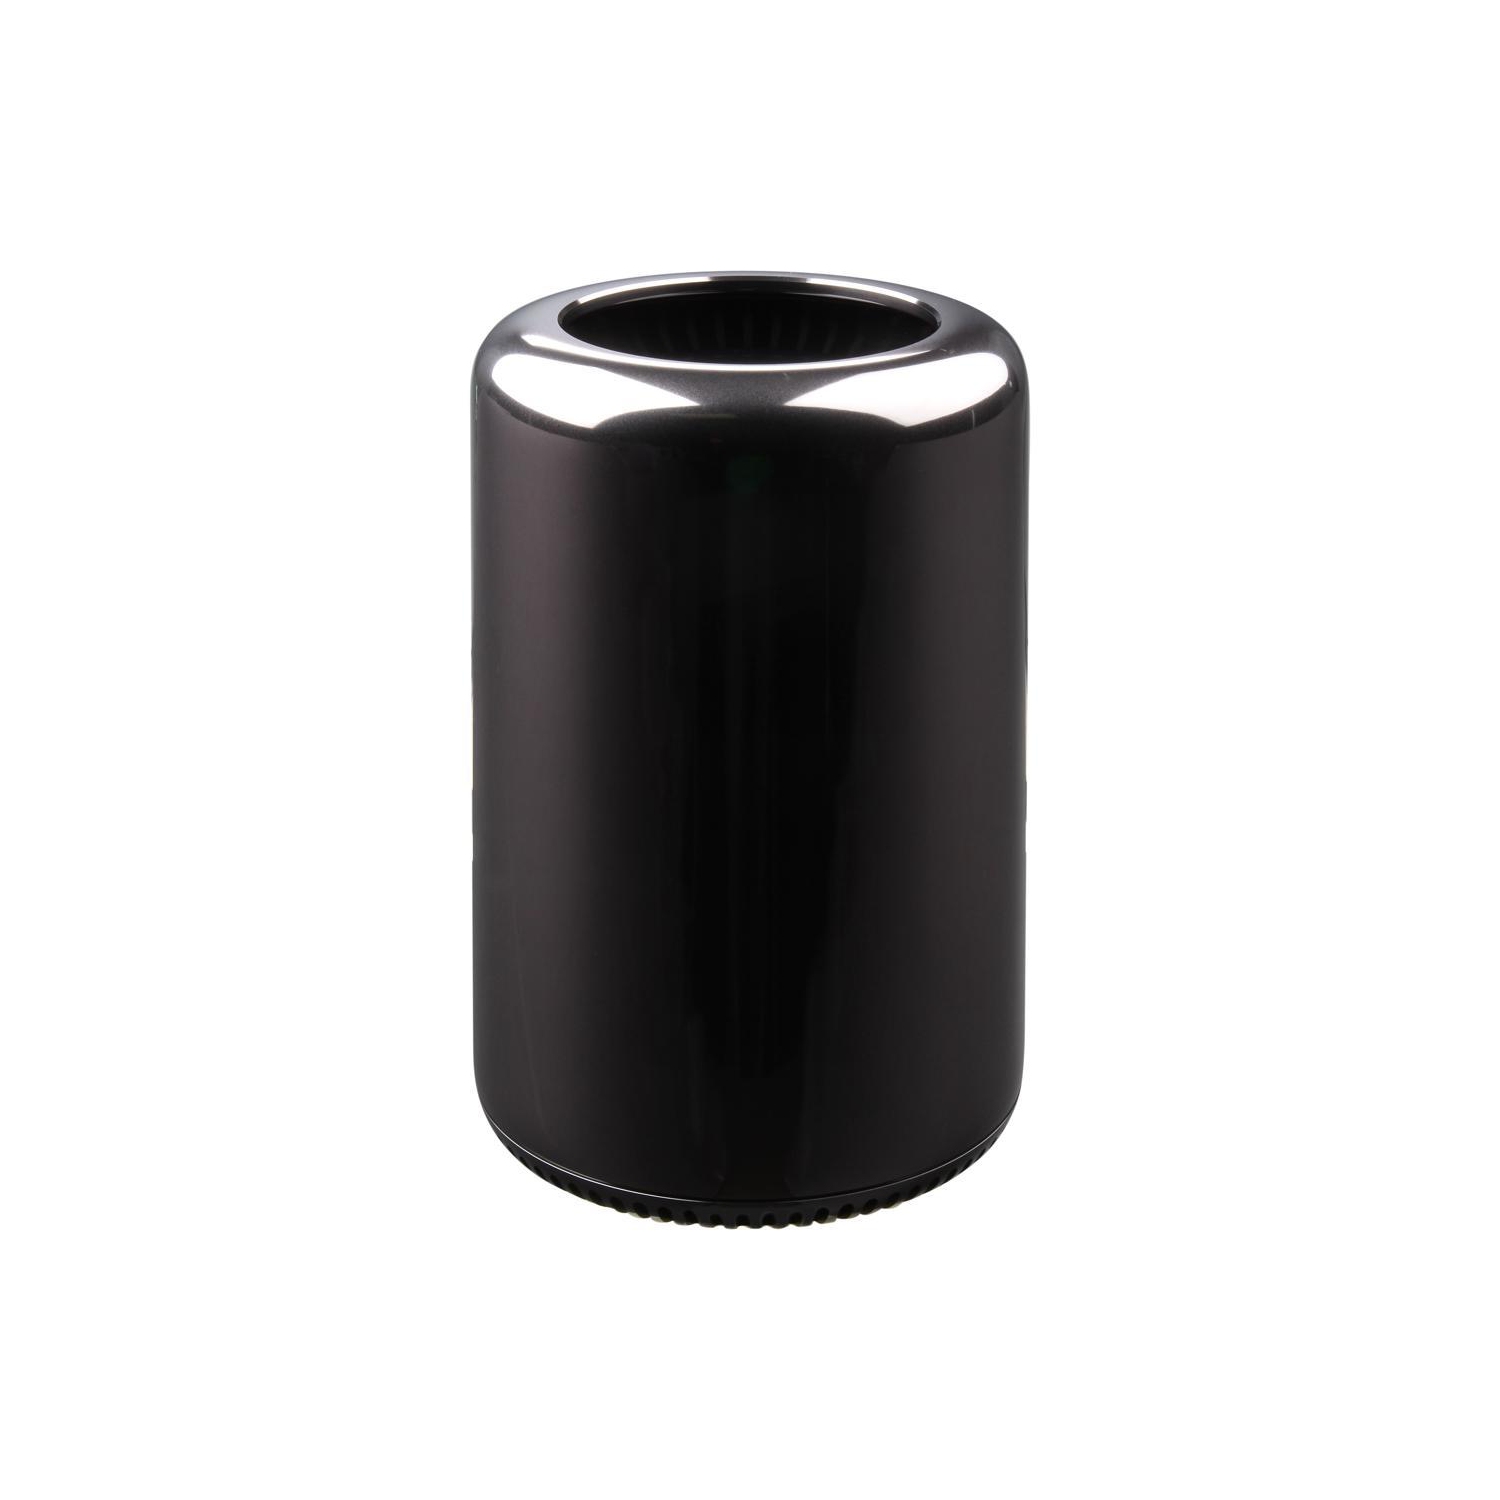 Refurbished (Excellent) - Apple Mac Pro Late 2013 CTO/MD878LL/A Desktop Computer 3.5Ghz 6-Core 16GB 1TB SSD Refurbished Grade A+ 10/10 Condition